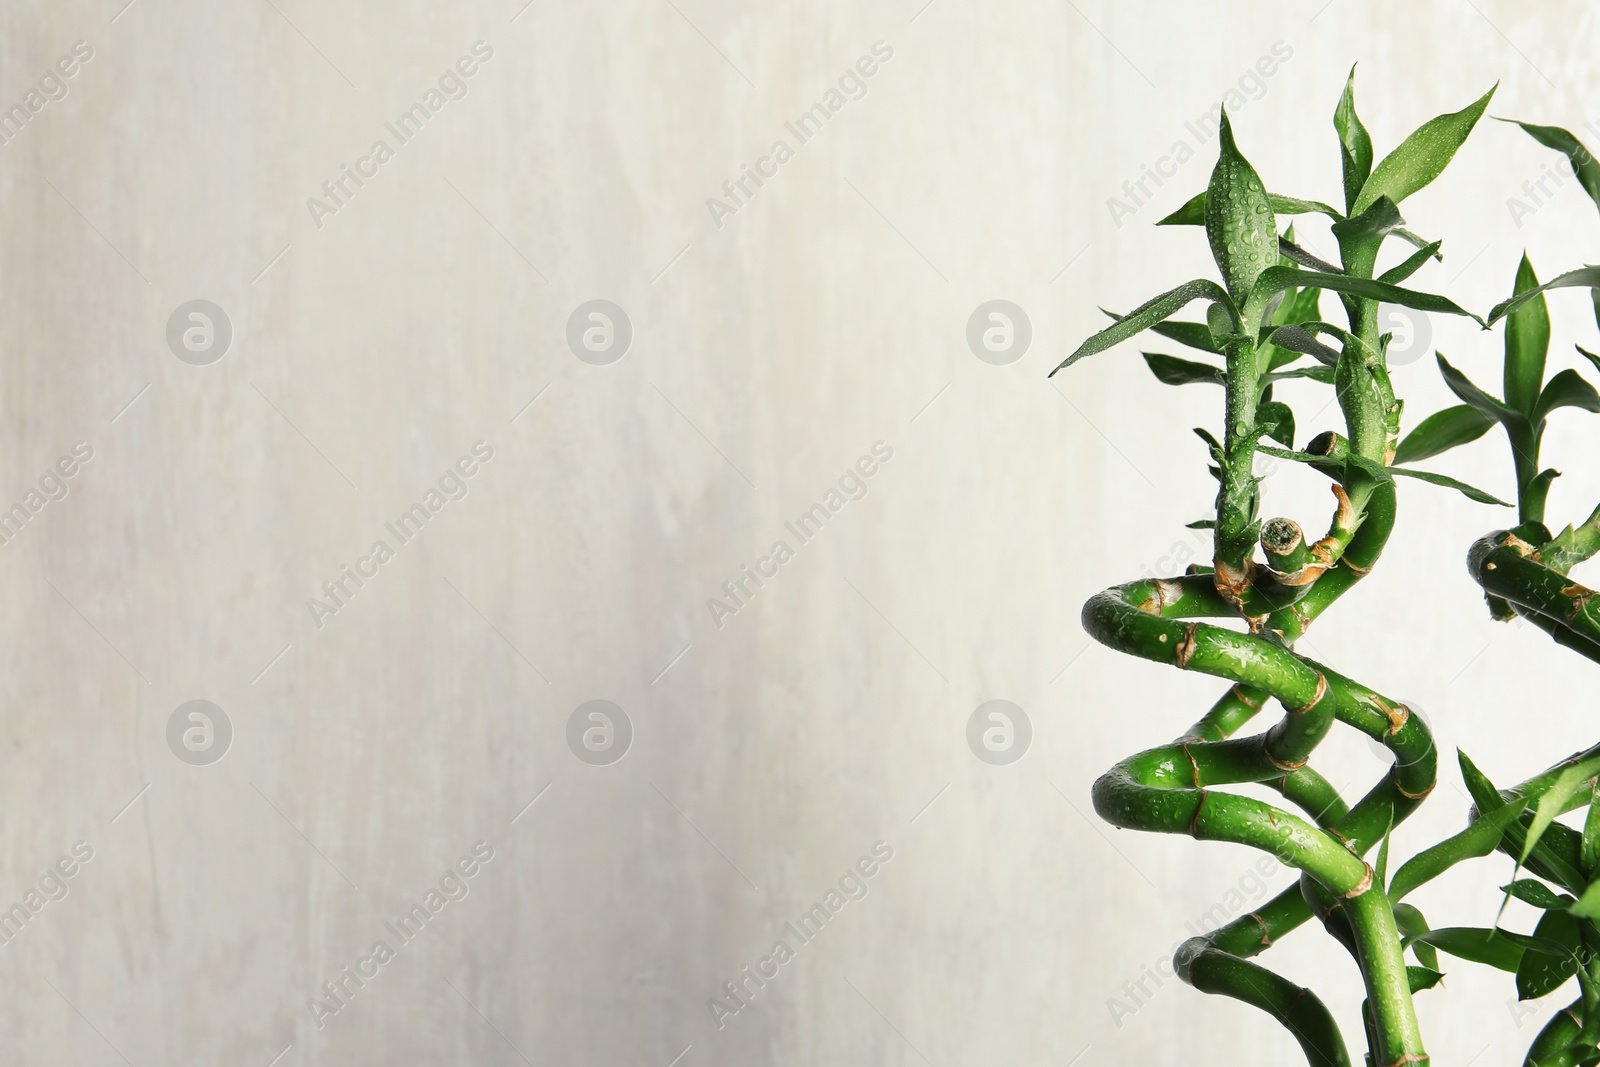 Photo of Green bamboo plant with leaves on light background. Space for text